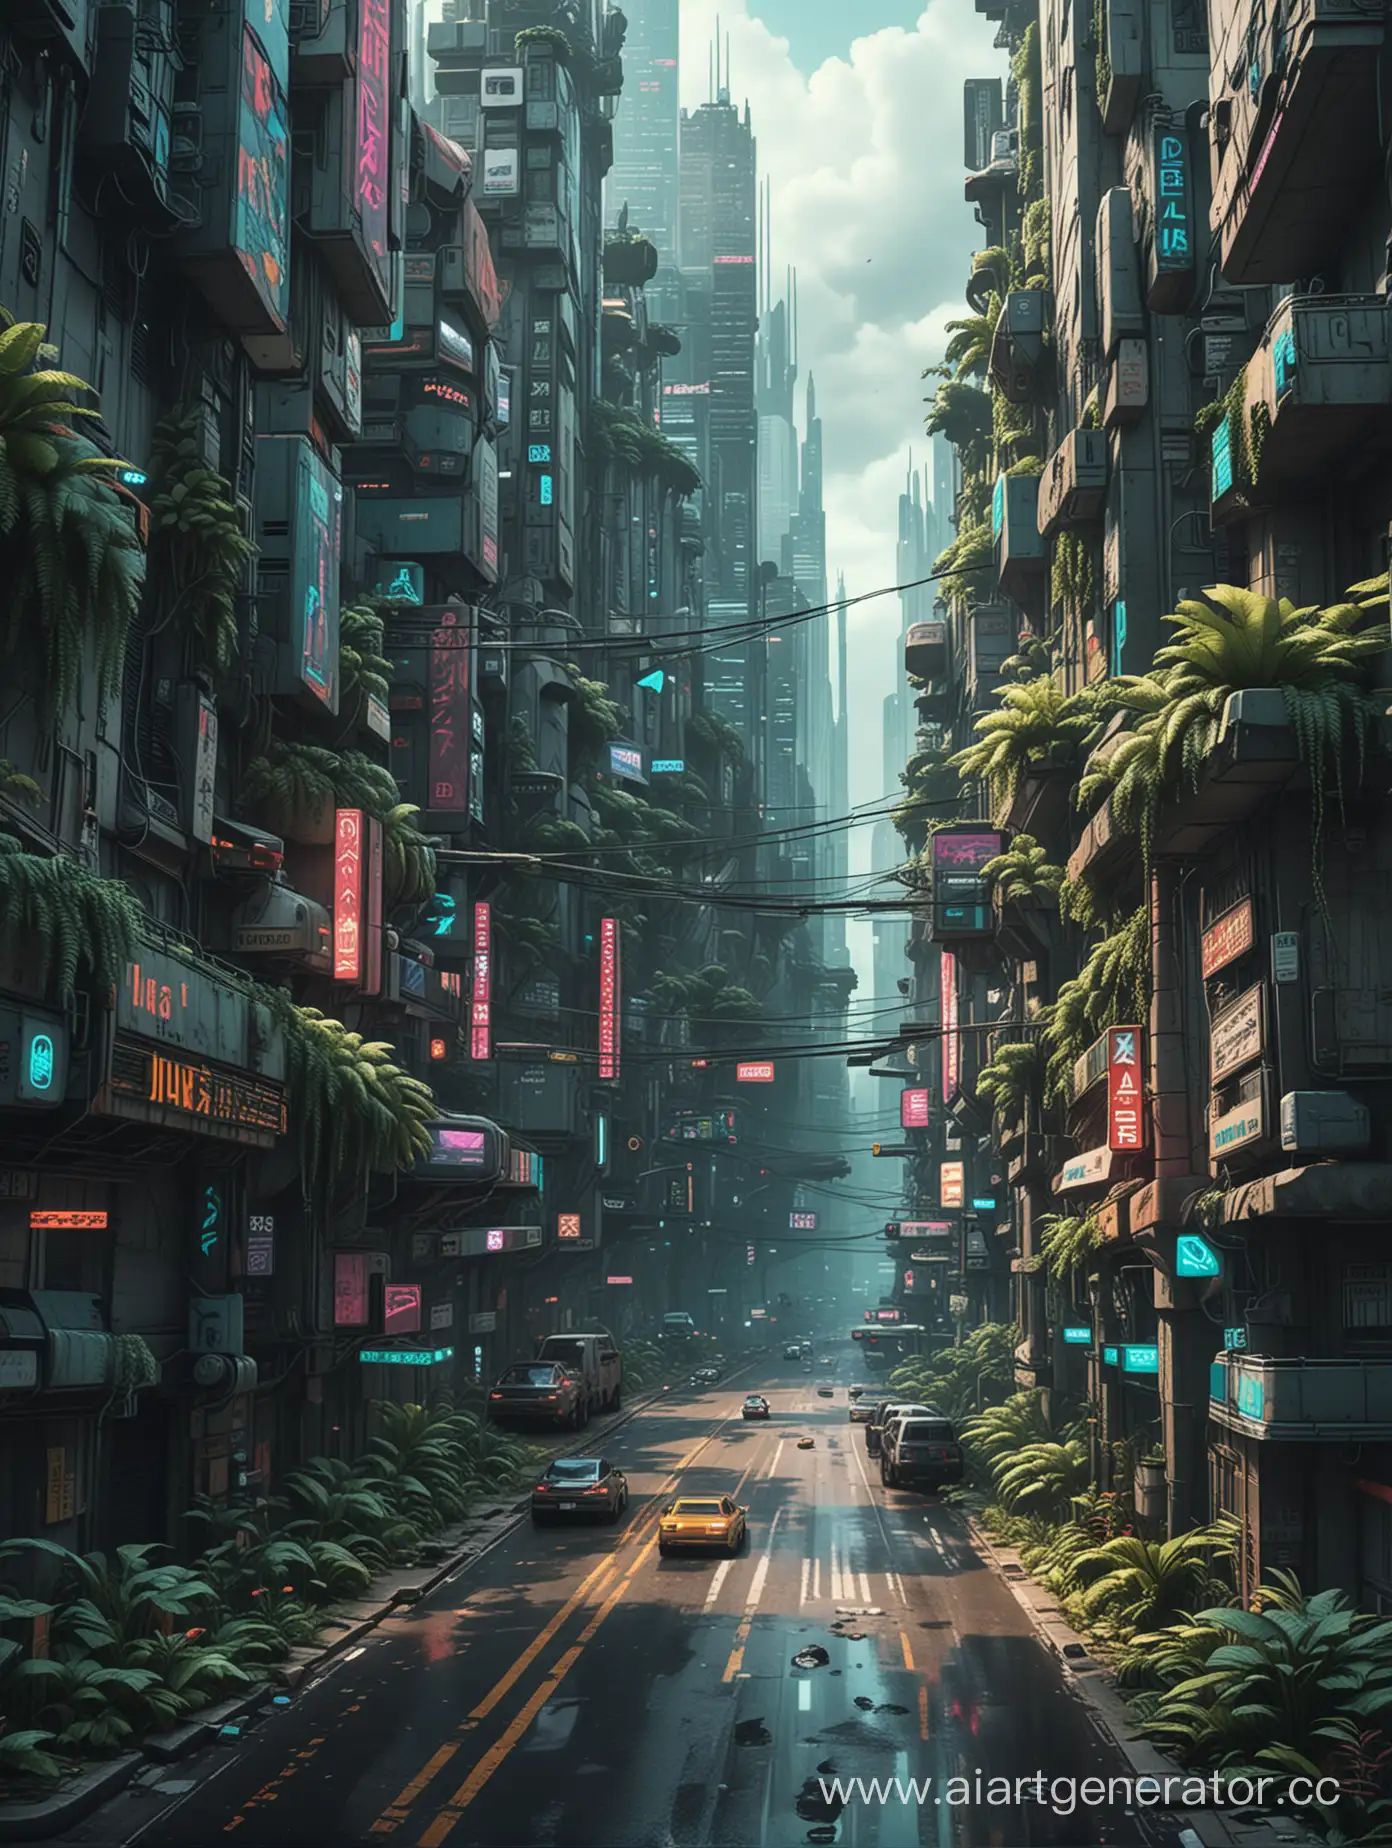 Futuristic-Cyberpunk-Cityscape-with-Lush-Greenery-and-Busy-Streets